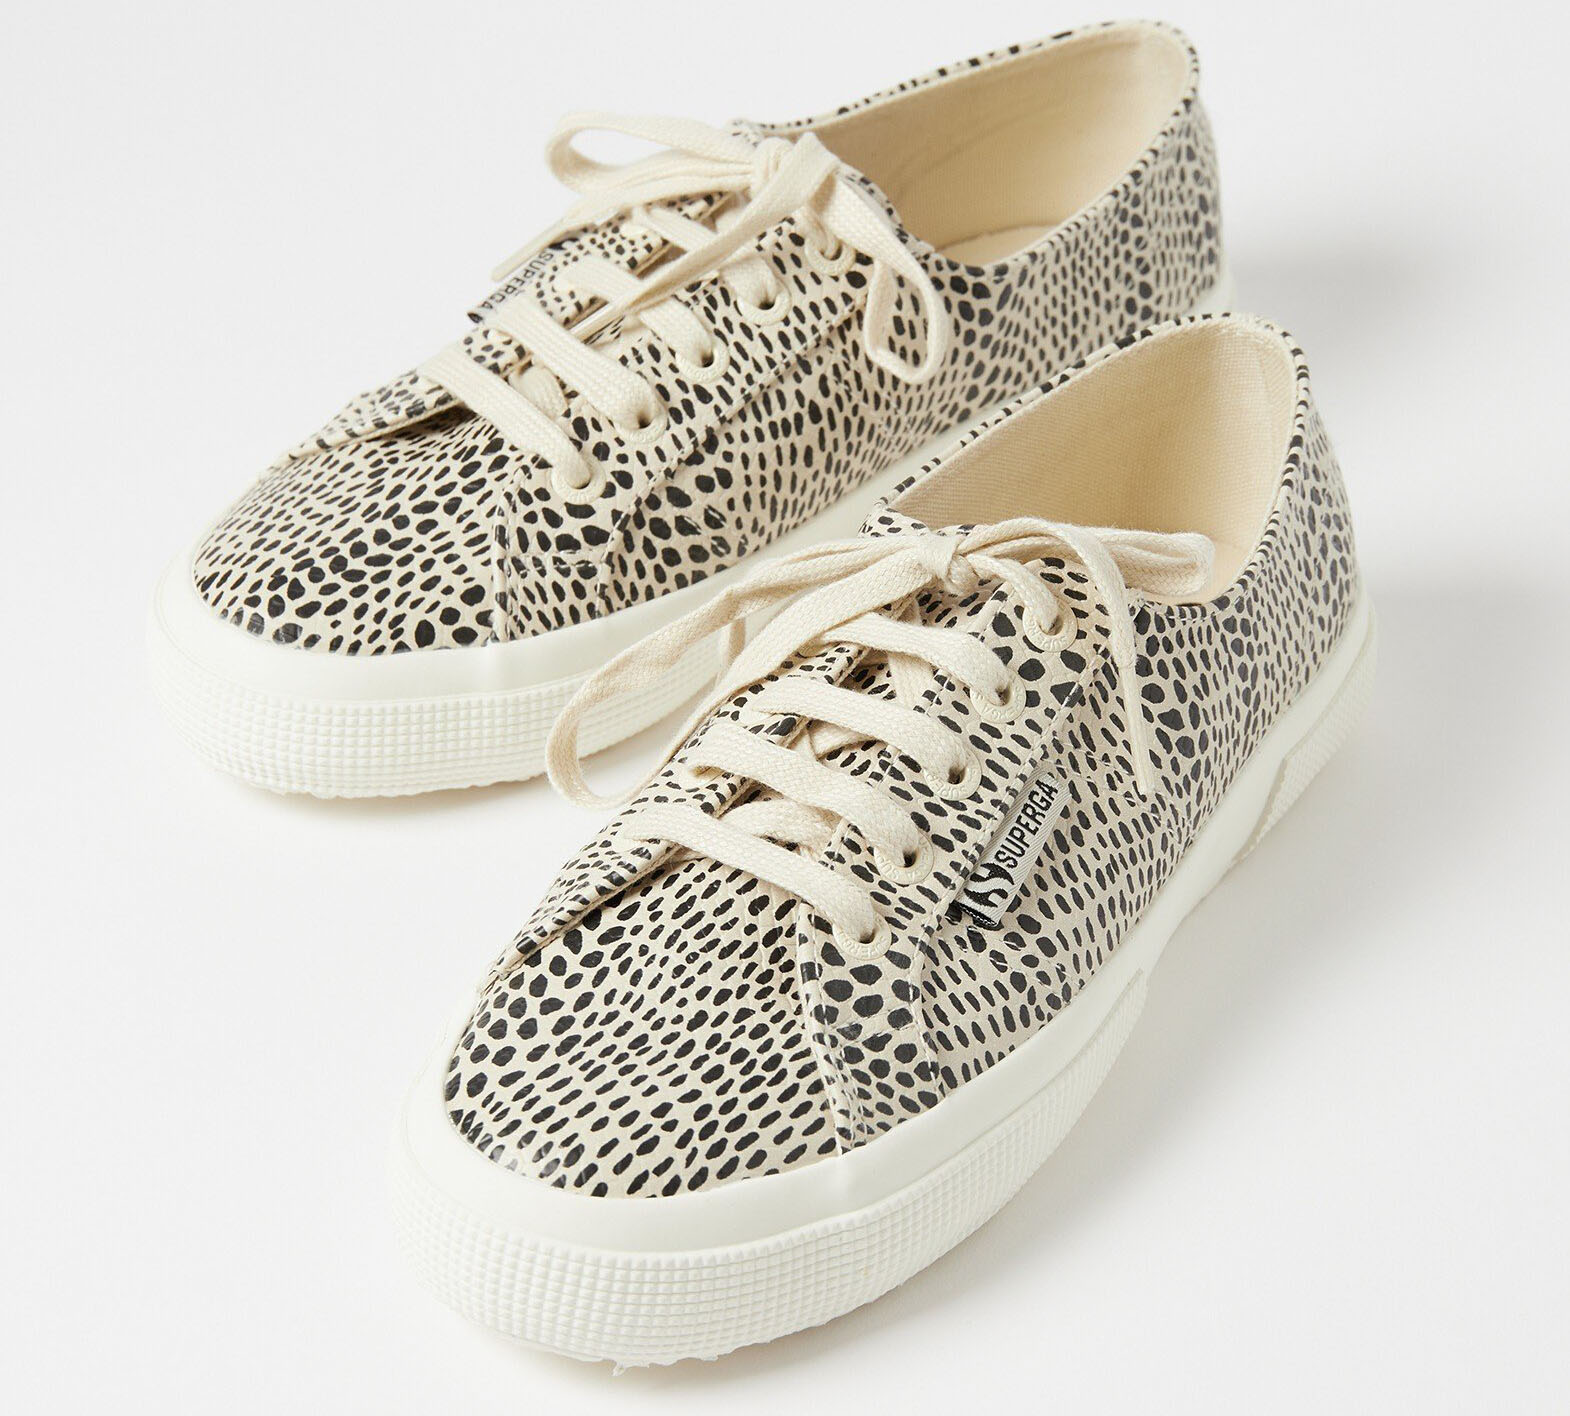 Featuring an all-over reptile print, these Superga sneakers will offer a playful yet fierce addition to your wardrobe